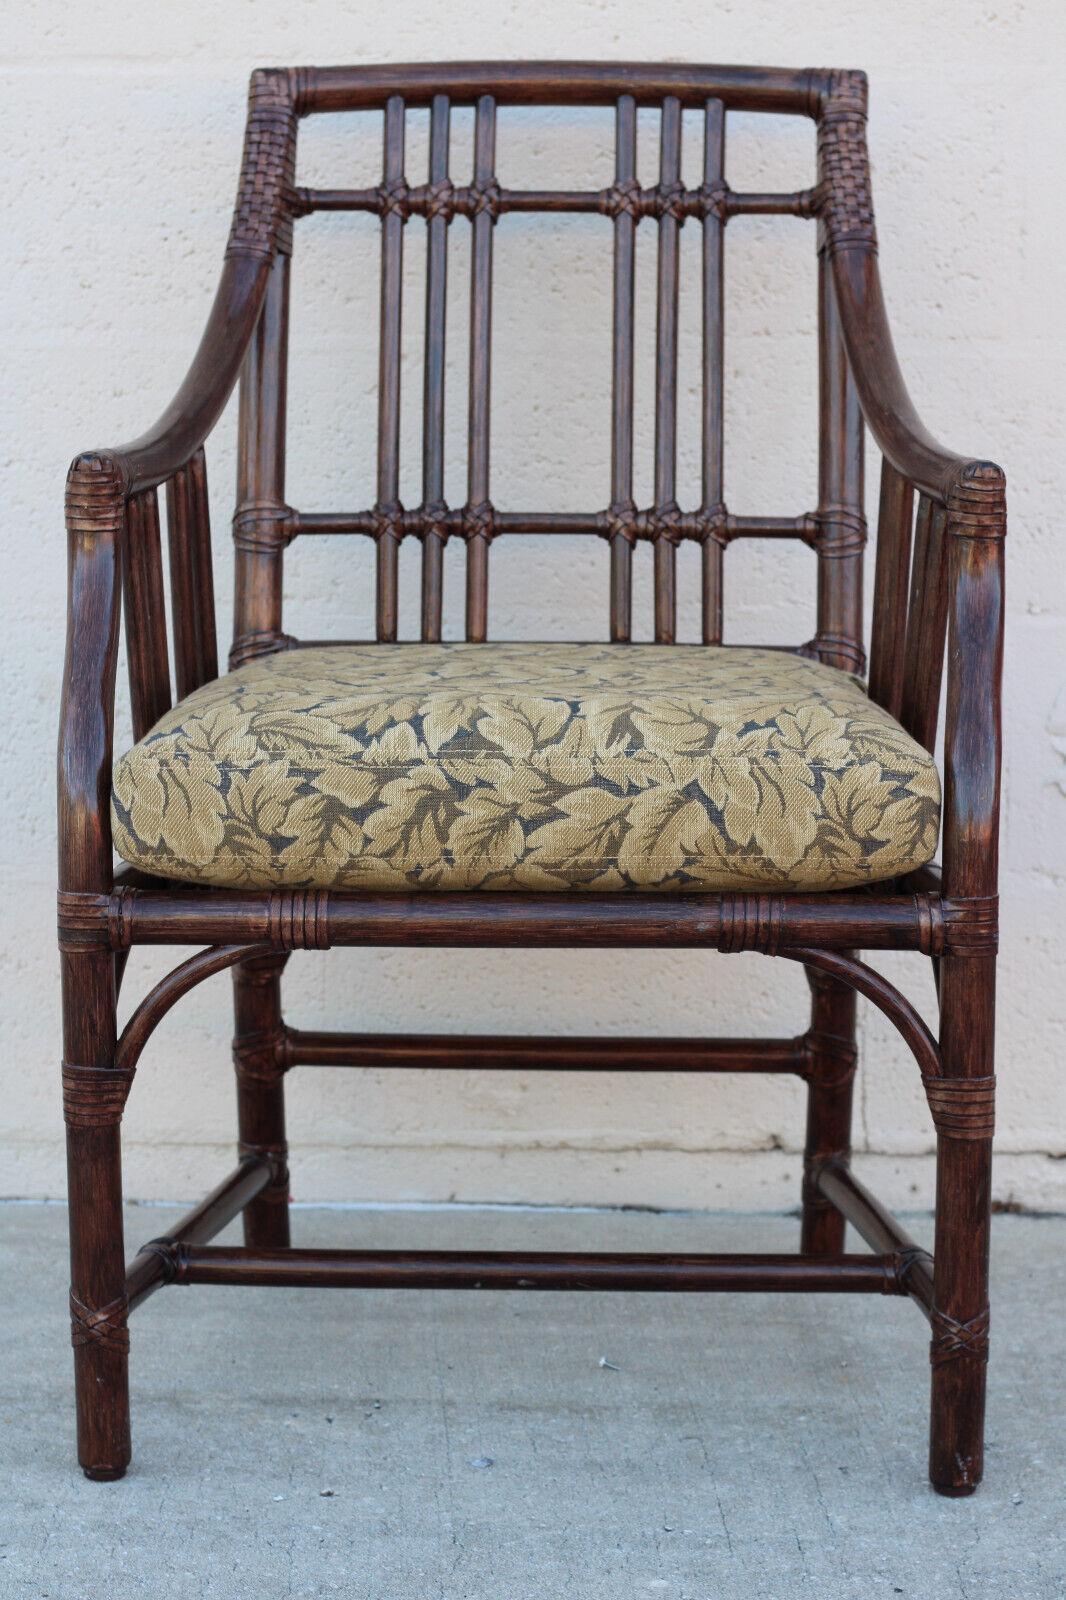 American Elinor McGuire Balboa Rattan Arm Chairs or Dining Chairs, a Pair